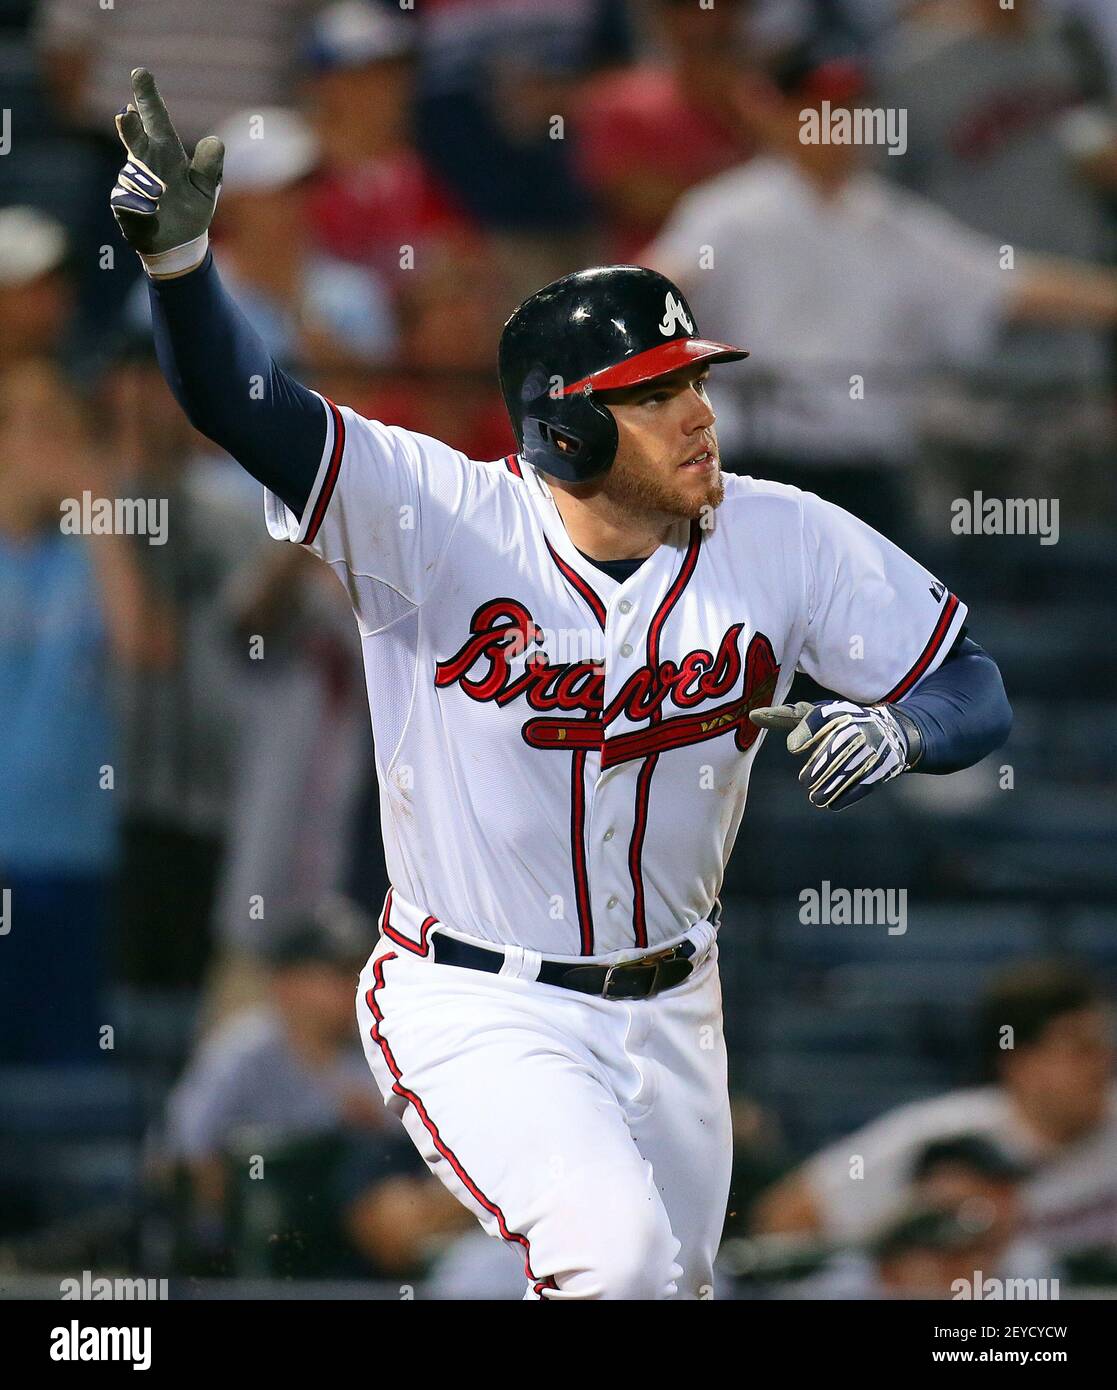 The Atlanta Braves' Freddie Freeman reacts to hitting a game-winning RBI  single in the 10th inning to beat the Minnesota Twins, 5-4, at Turner Field  in Atlanta, Georgia, Tuesday, May 21, 2013. (